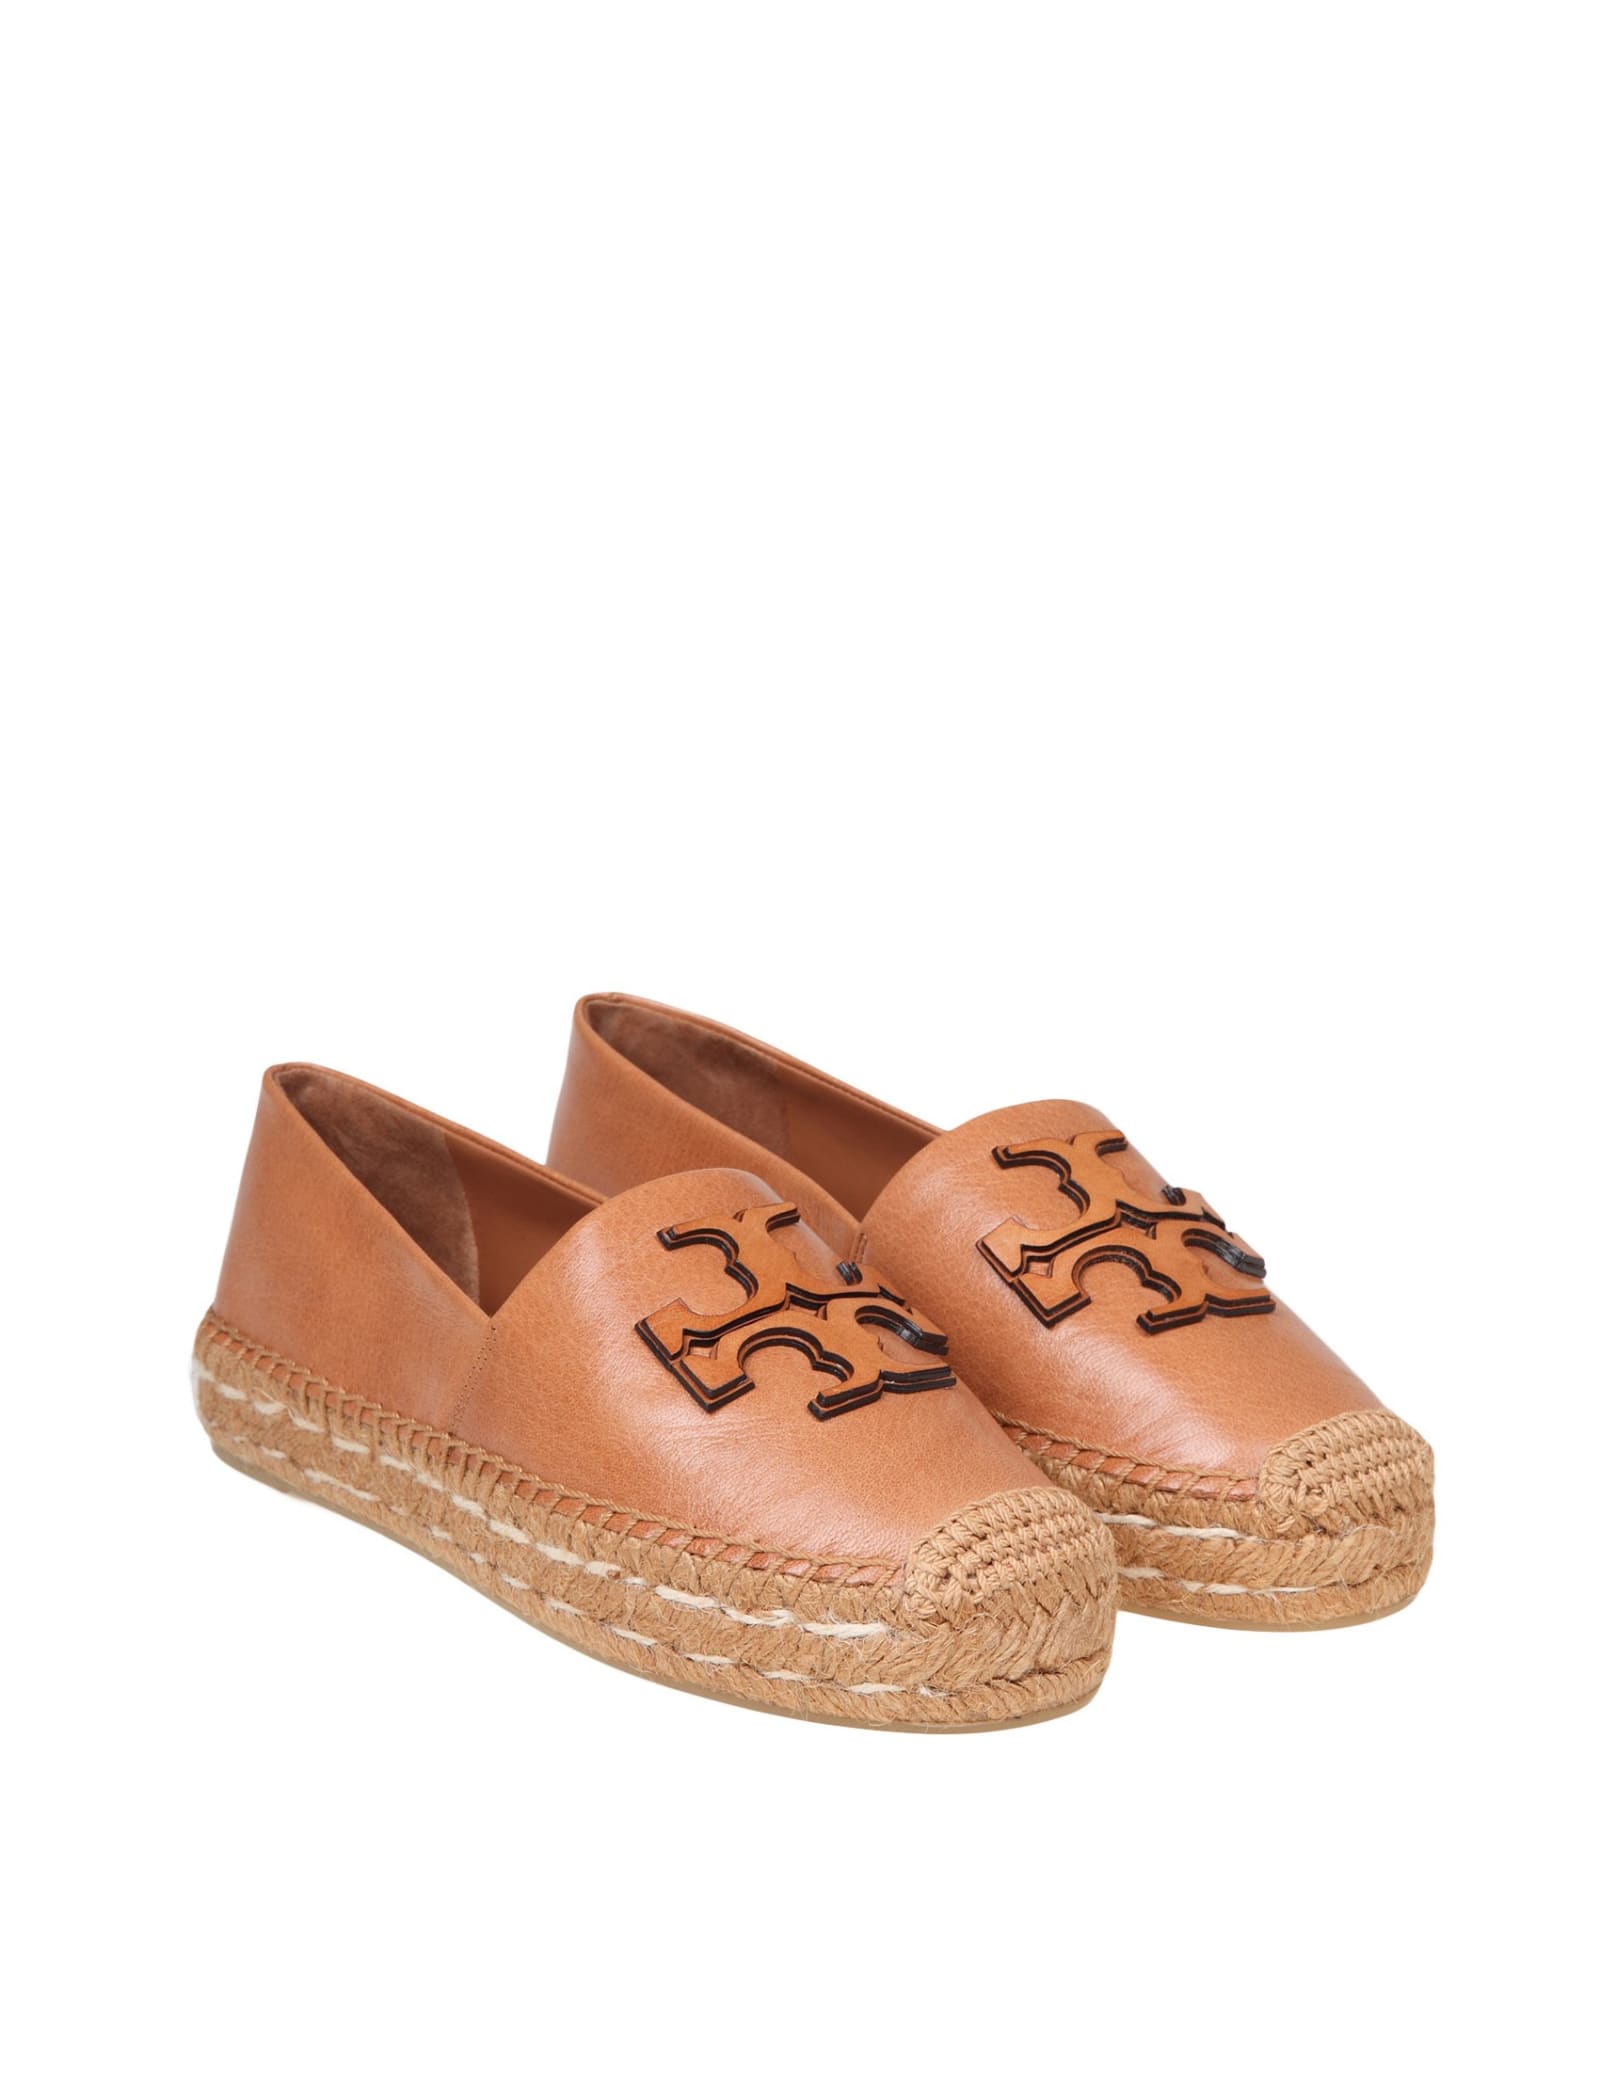 Shop Tory Burch Ines Platform Espadrille In Tan Color Leather